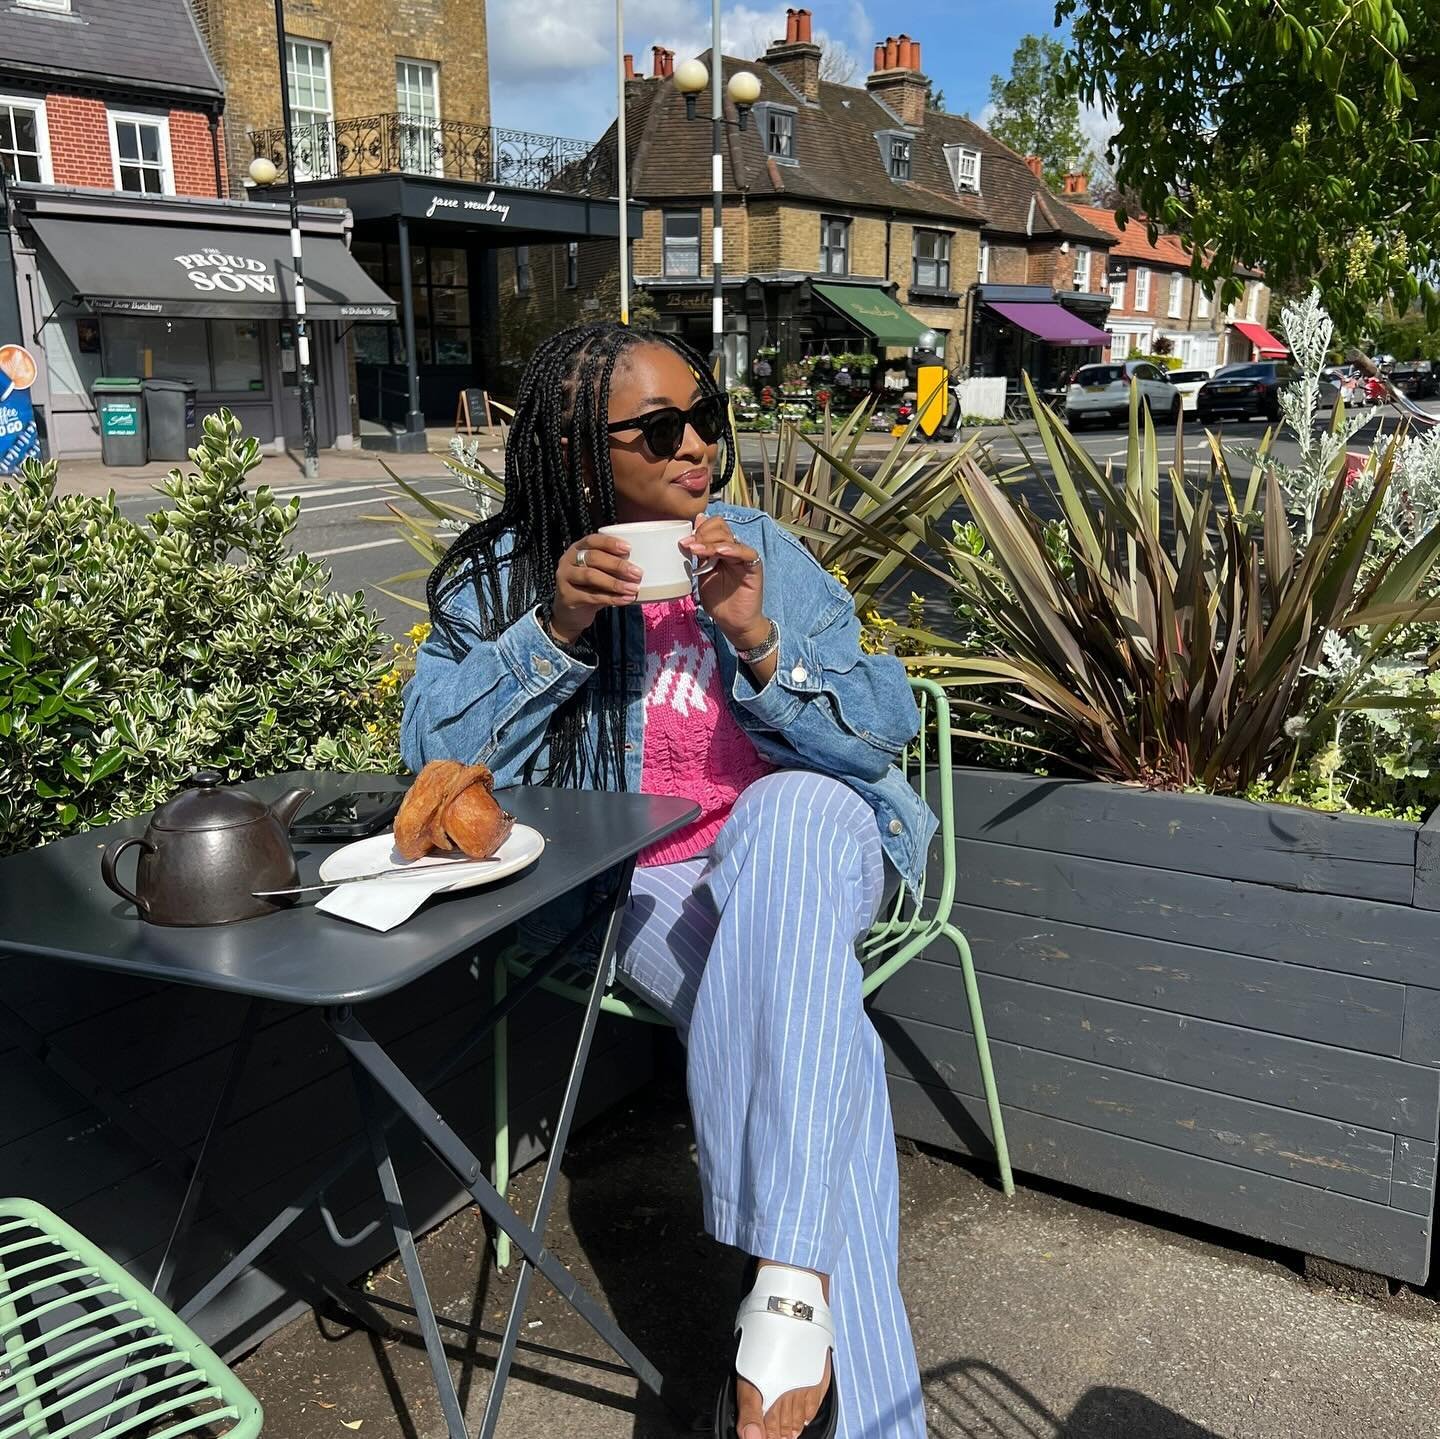 listen here sunshine, don&rsquo;t go anywhere 🥲 🌞 
@gailsbakery I&rsquo;ll still have a hot drink 
welcome to the roster @maisonalaia @harrods 
dreamiest changing room @thedorchester 
can&rsquo;t believe I left the cover on my car 🥹 I wish 
@grape